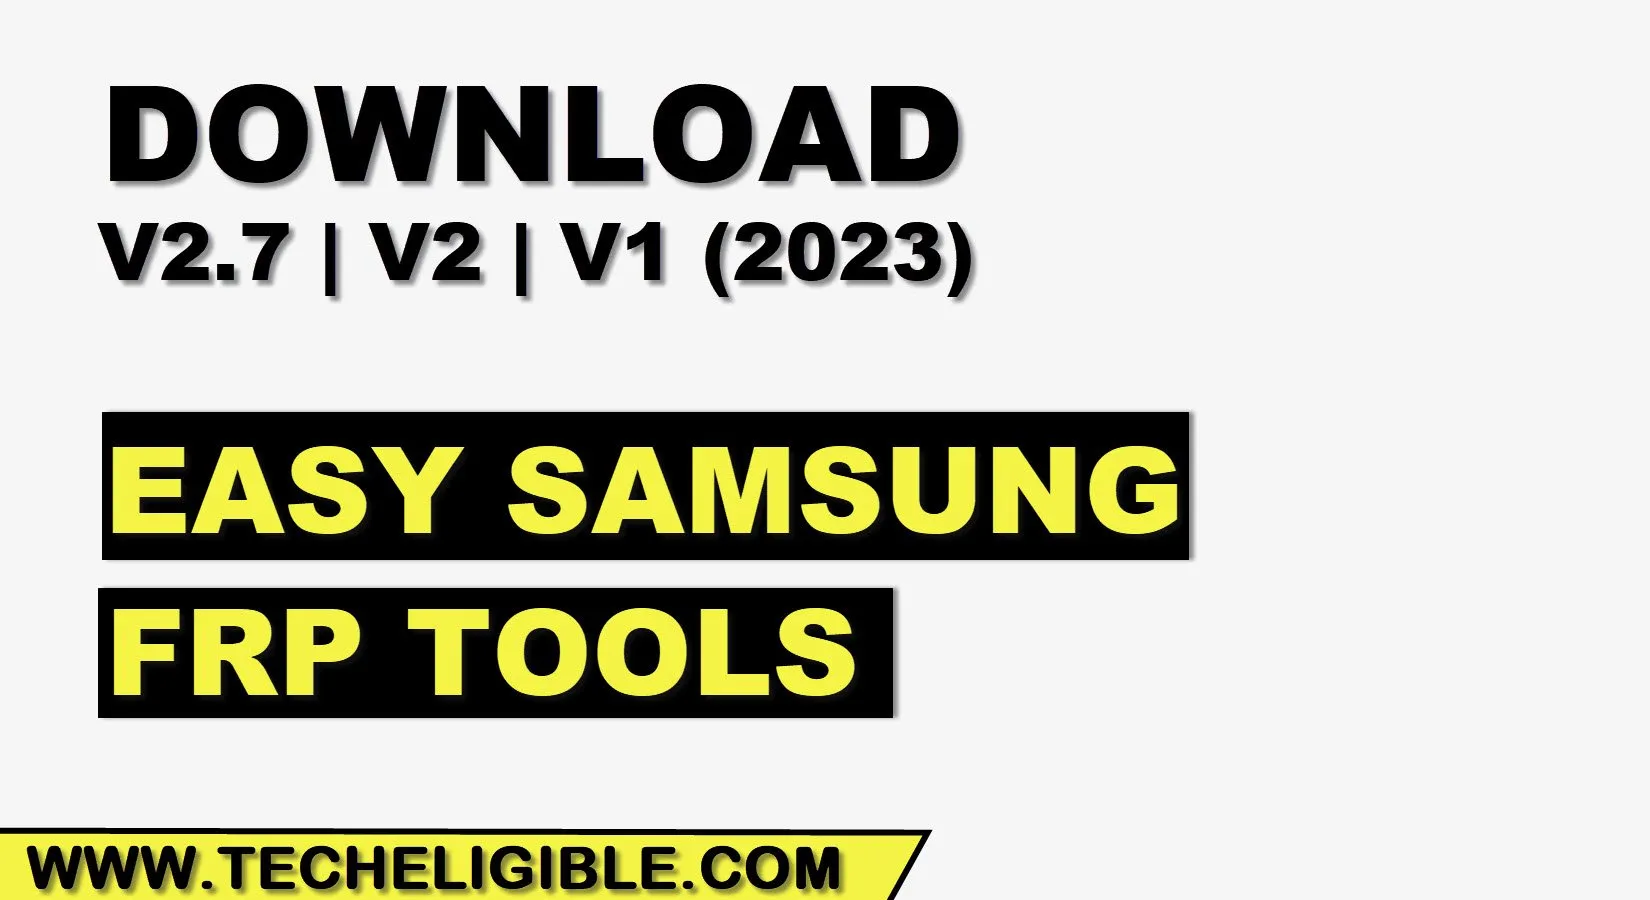 How to download all versions of easy samsung frp tools V2.7